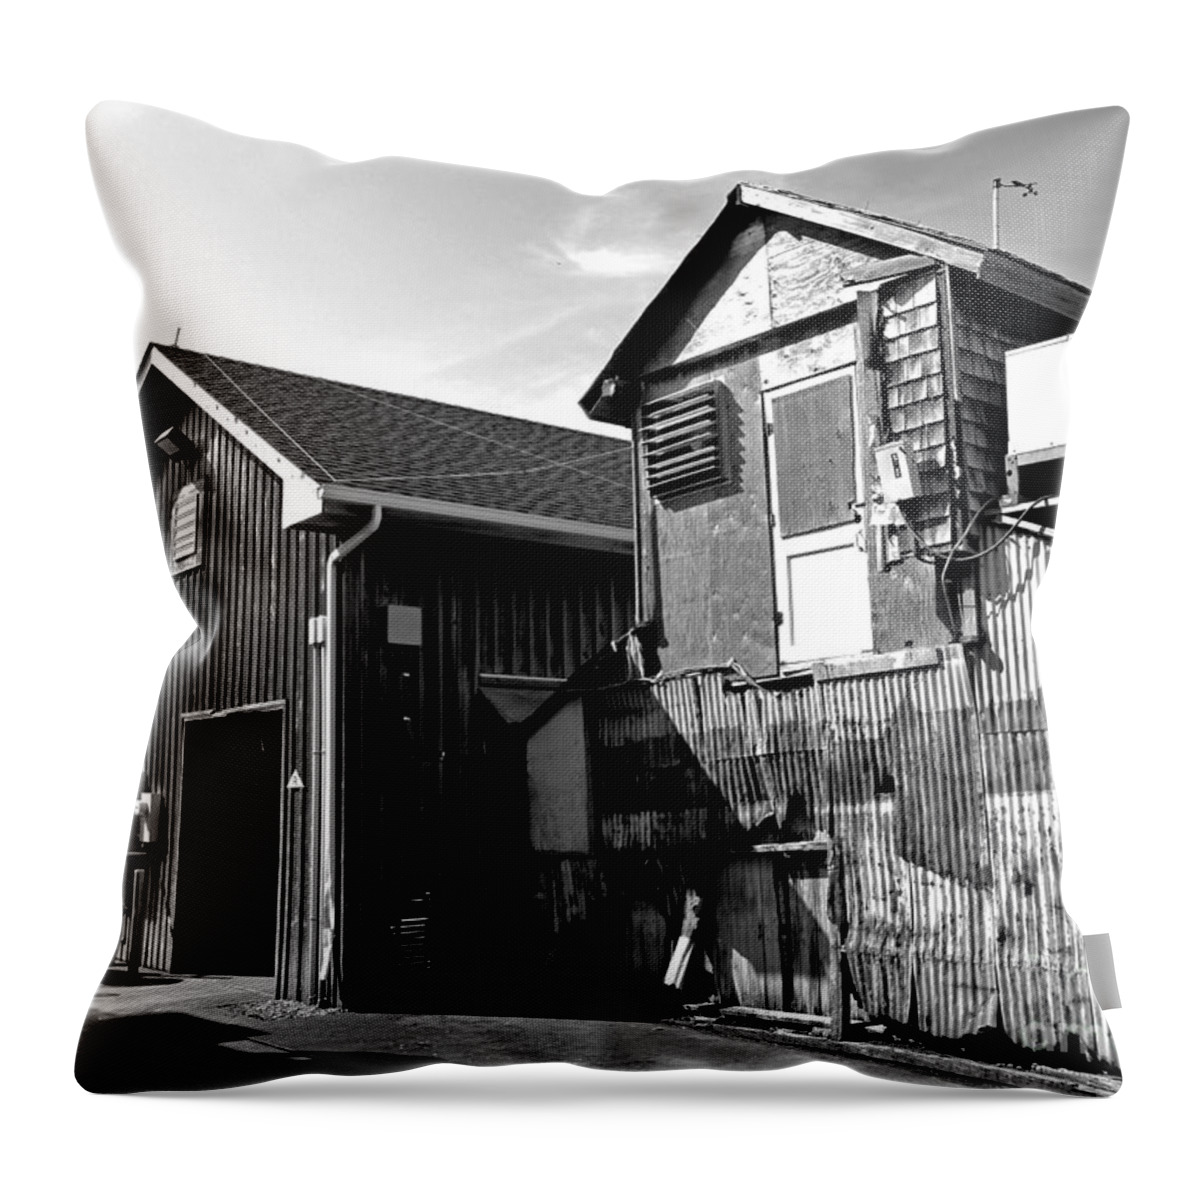 Lbi Throw Pillow featuring the photograph Seaport by Mark Miller